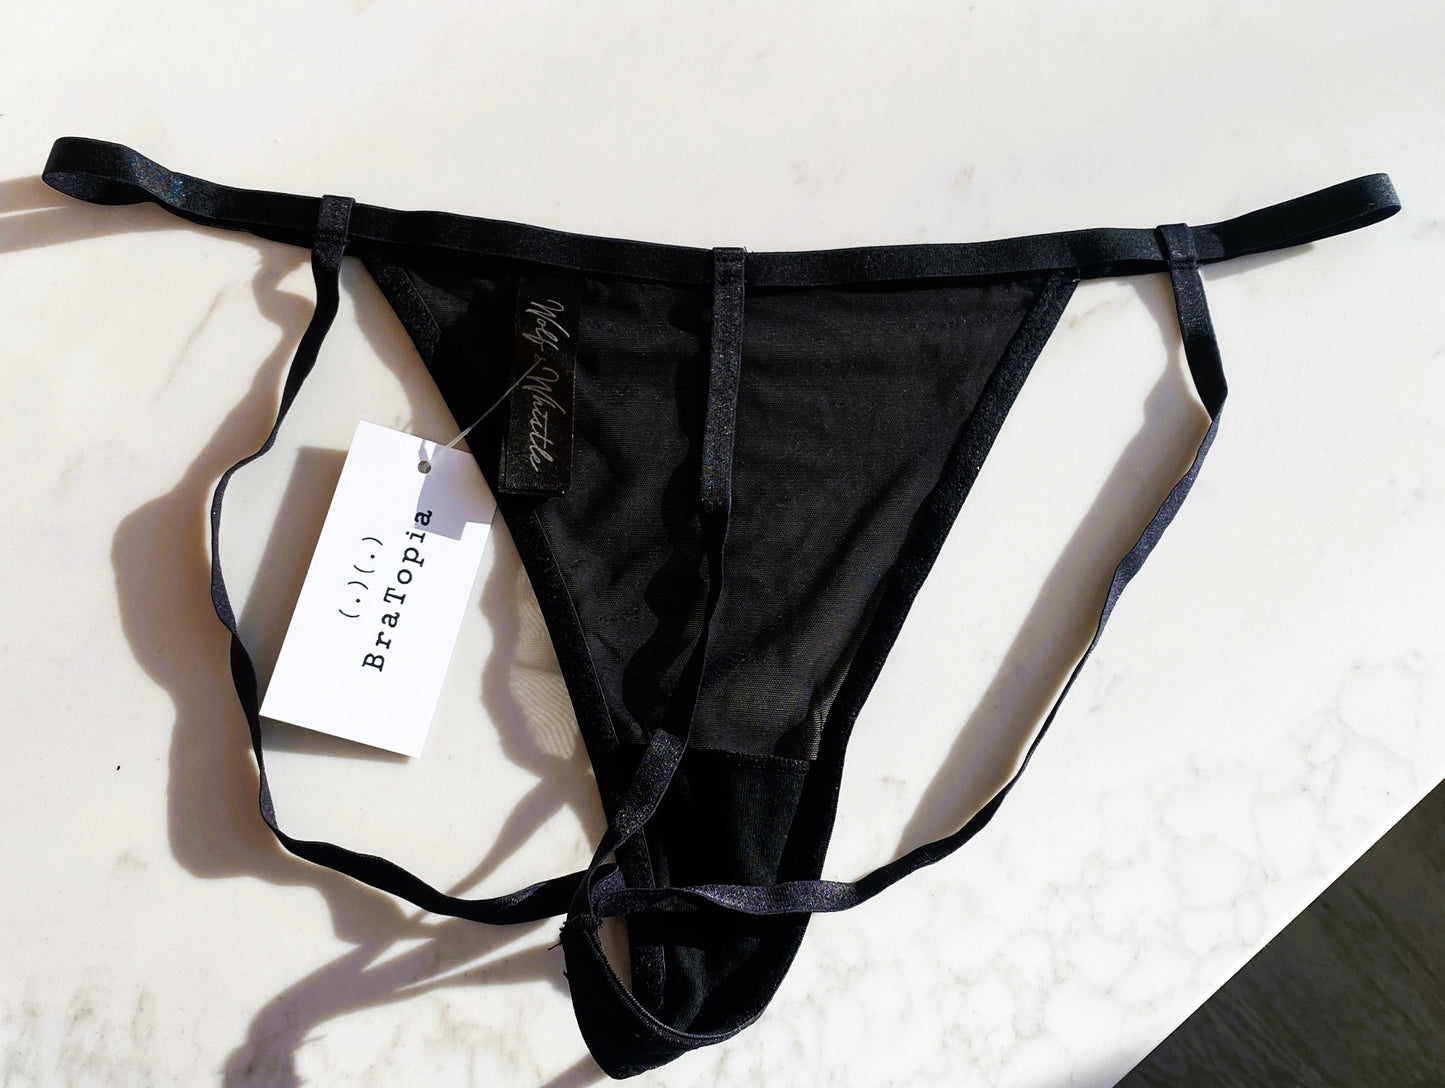 Kiera Panty In Black - Playful Promises, back view of product picture with BraTopia tag on it